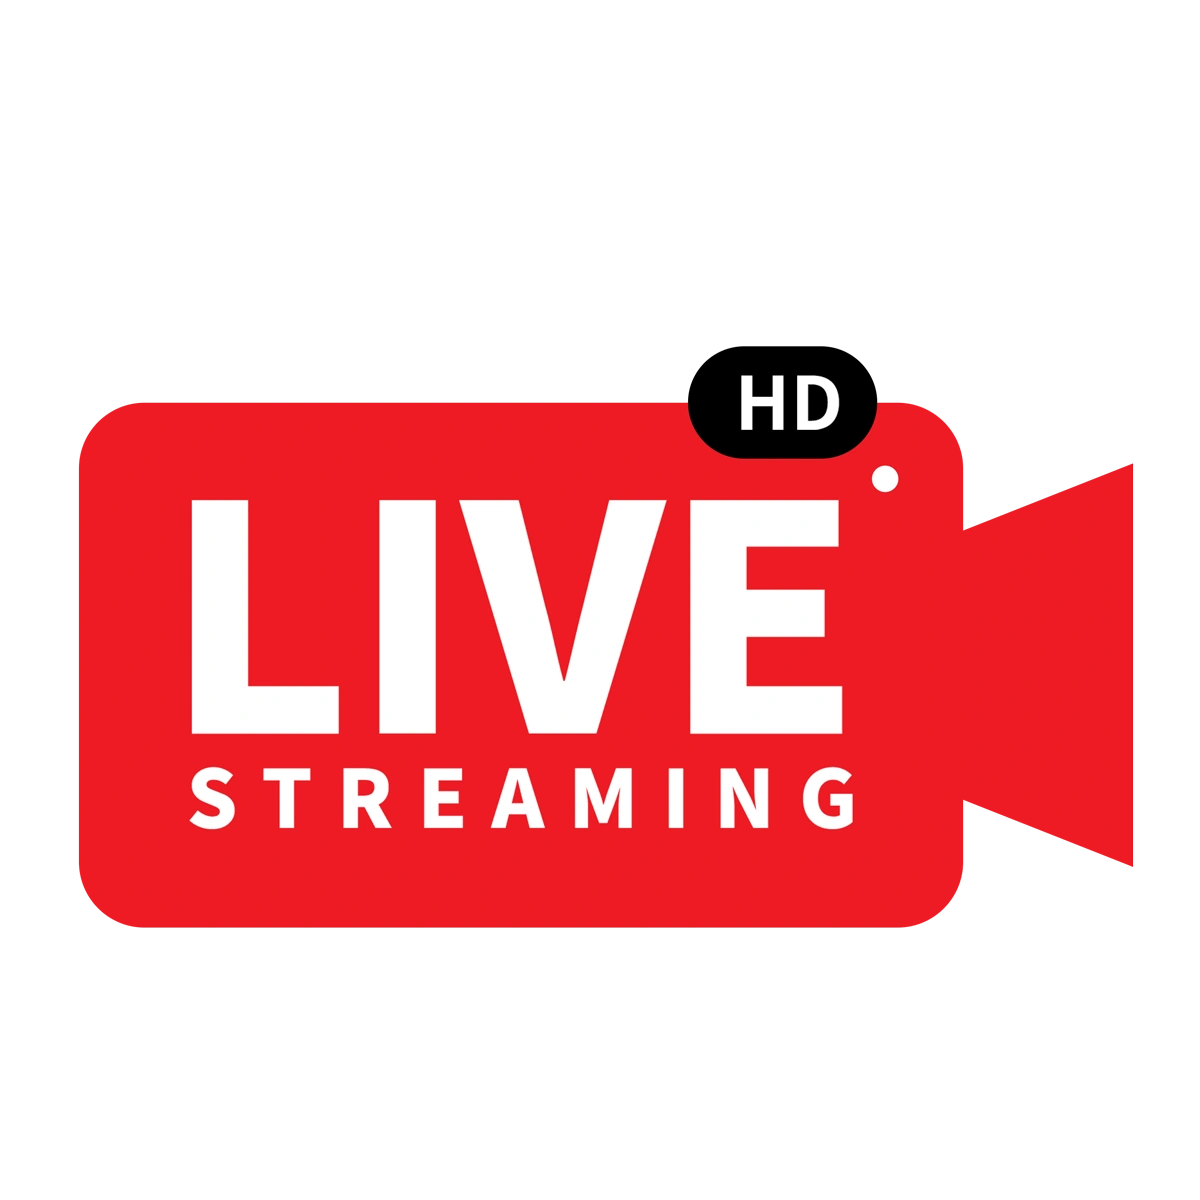 event live streaming in Manchester.
live streaming service in Manchester. teams webcasting company, 